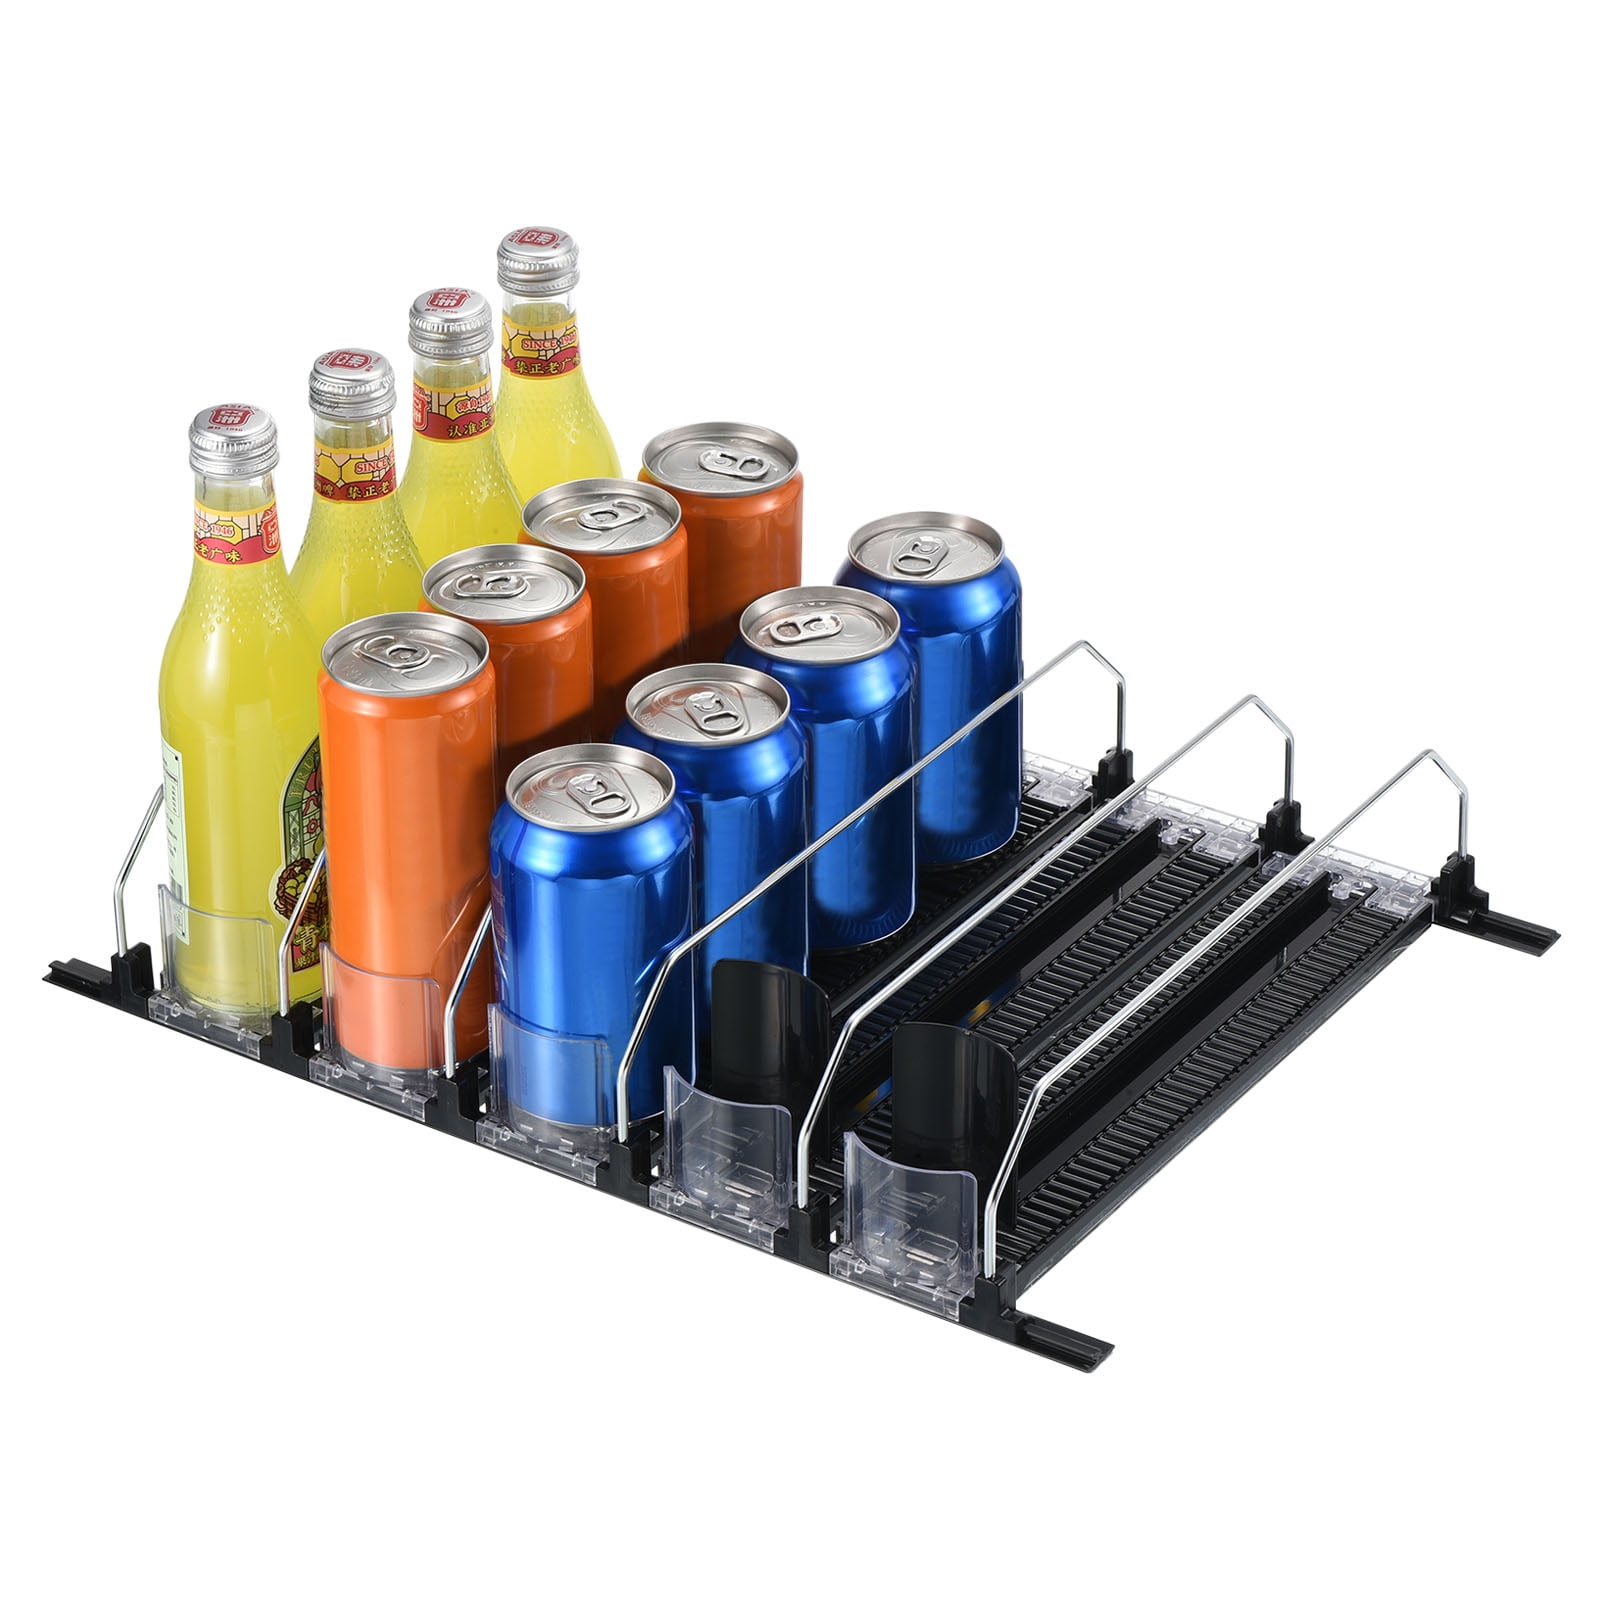 Upgrade Drink Organizer for Fridge, LAKIX Self-Sliding soda Can Dispenser  for Refrigerator and Adjustable Width, 12oz to 20oz holds 25+ Cans(5 Rows